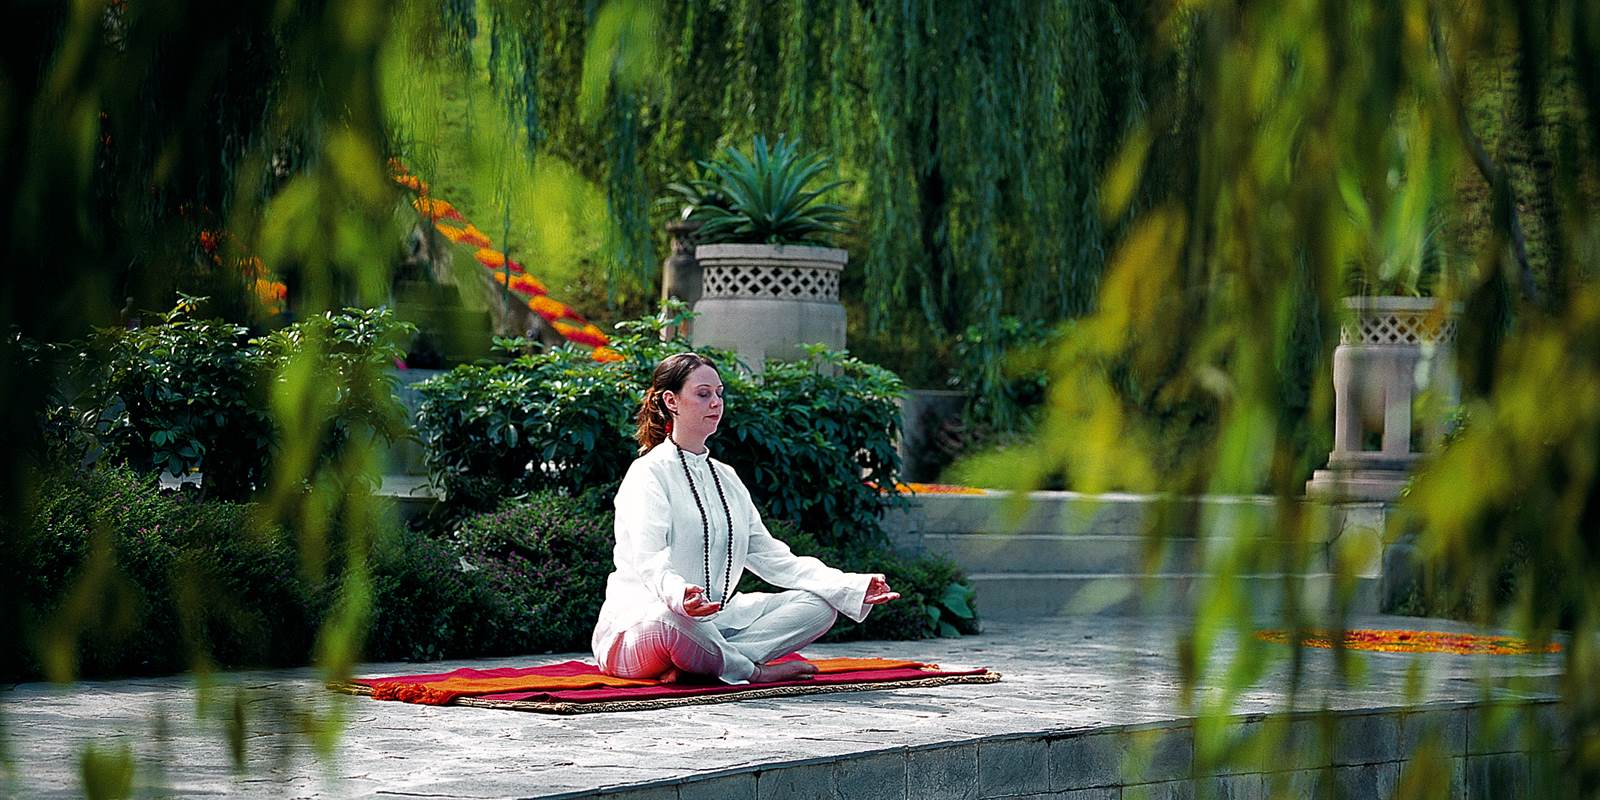 Meditation in Ananda Spa luxury Hotel in The Himalayas, India